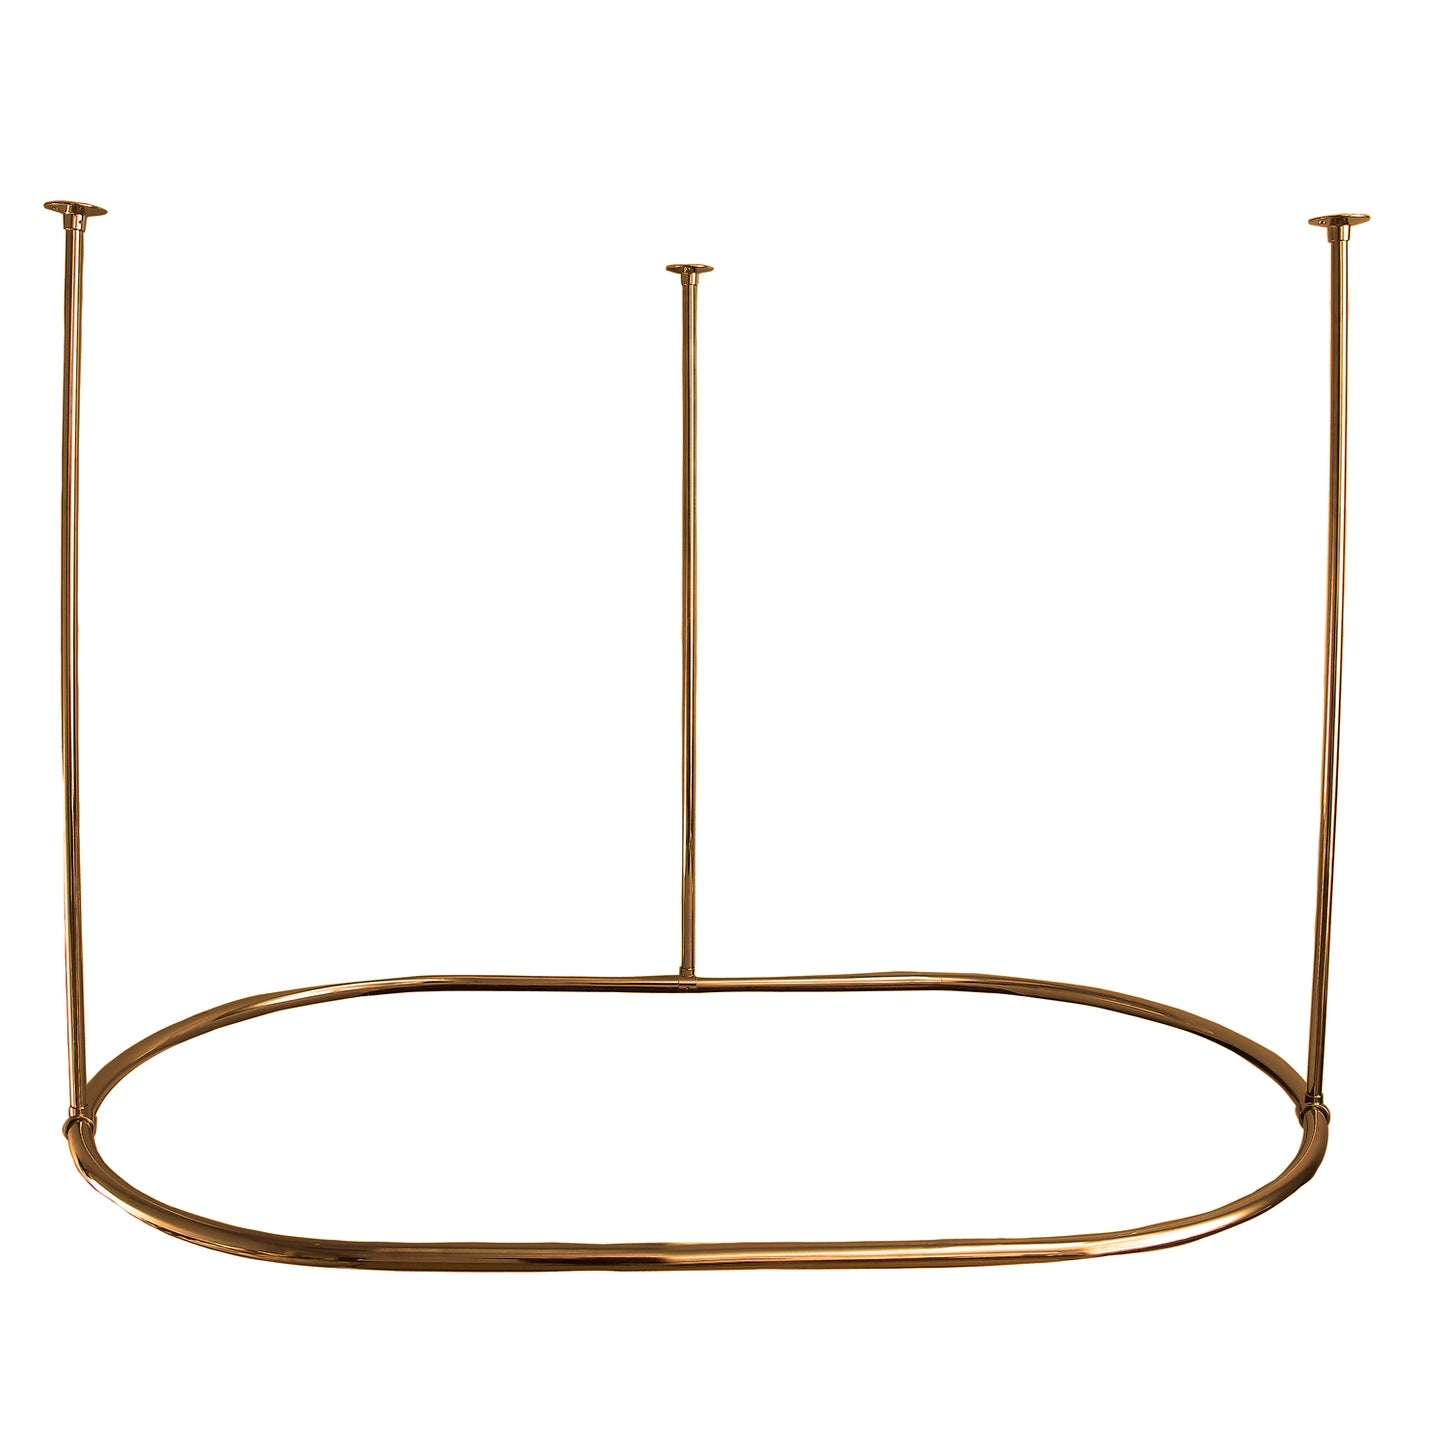 72" x 36" Oval Shower Curtain Ring in Polished Brass